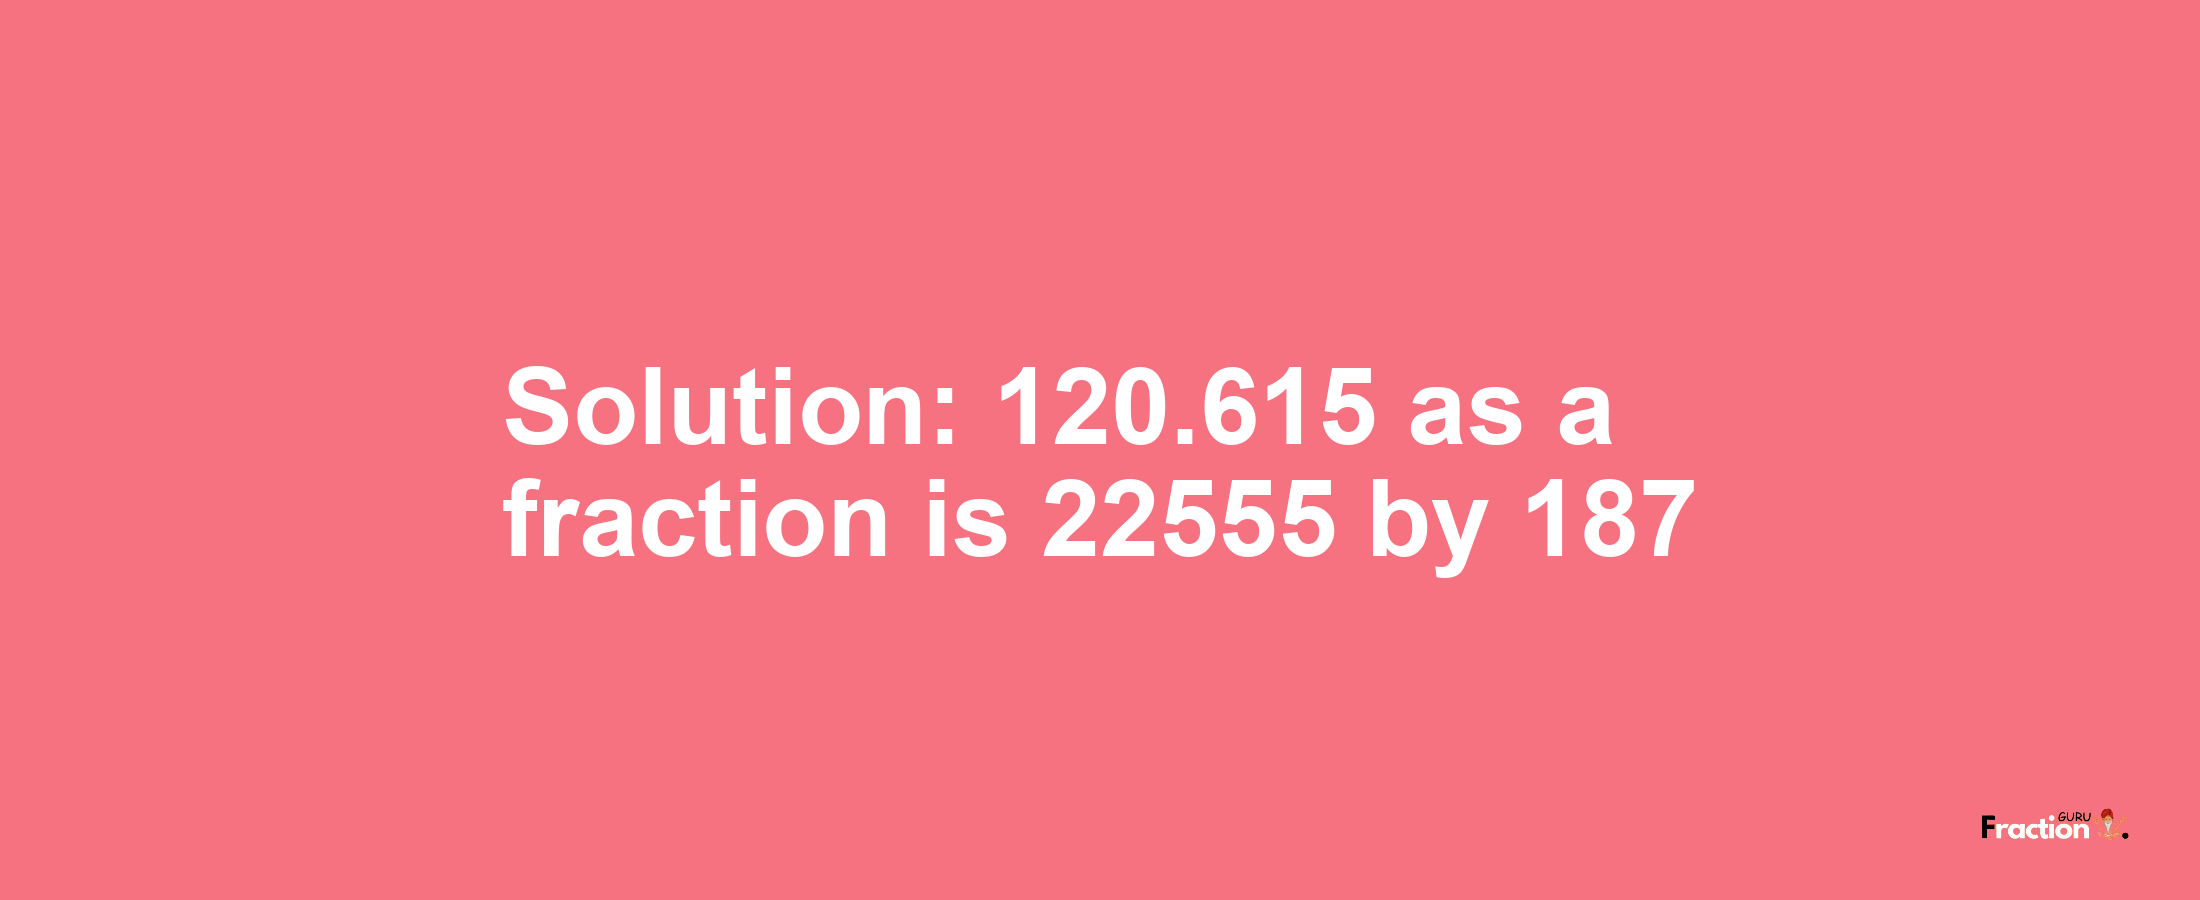 Solution:120.615 as a fraction is 22555/187